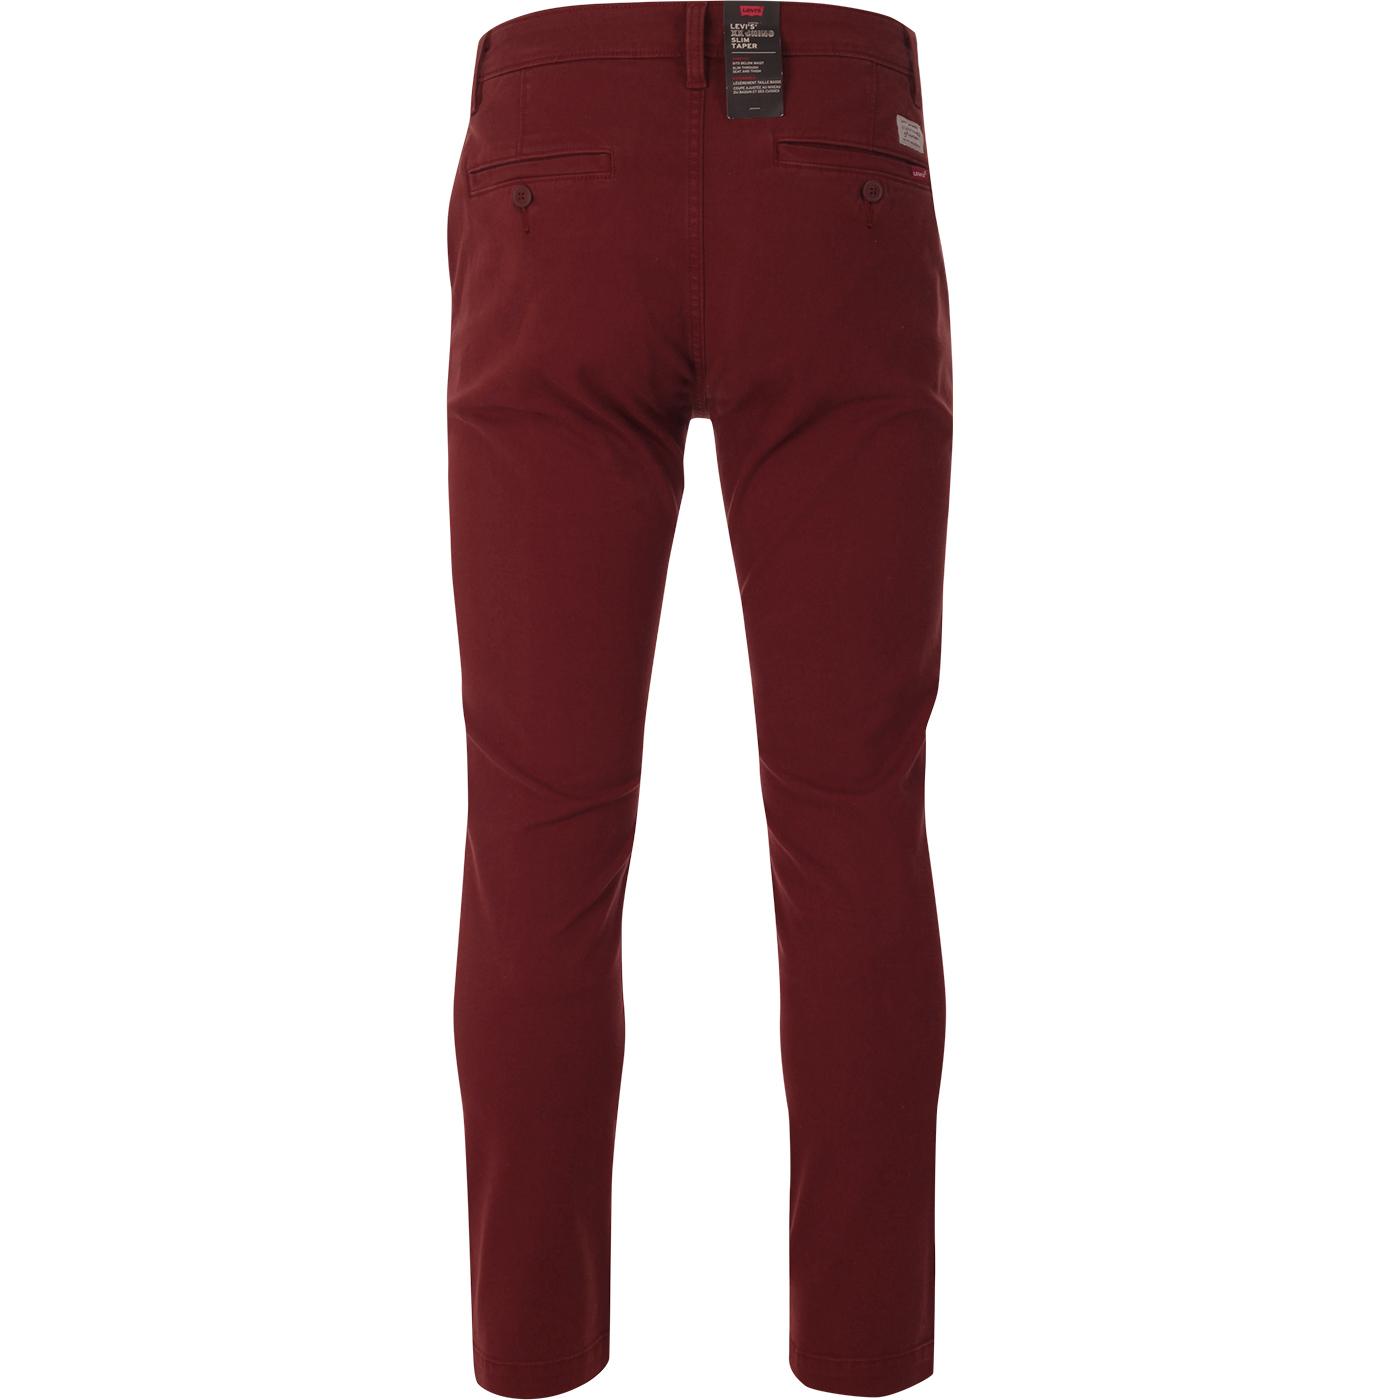 Levis Pants Mens 31x32 Red Burgundy Chino Brushed Twill Mid Rise